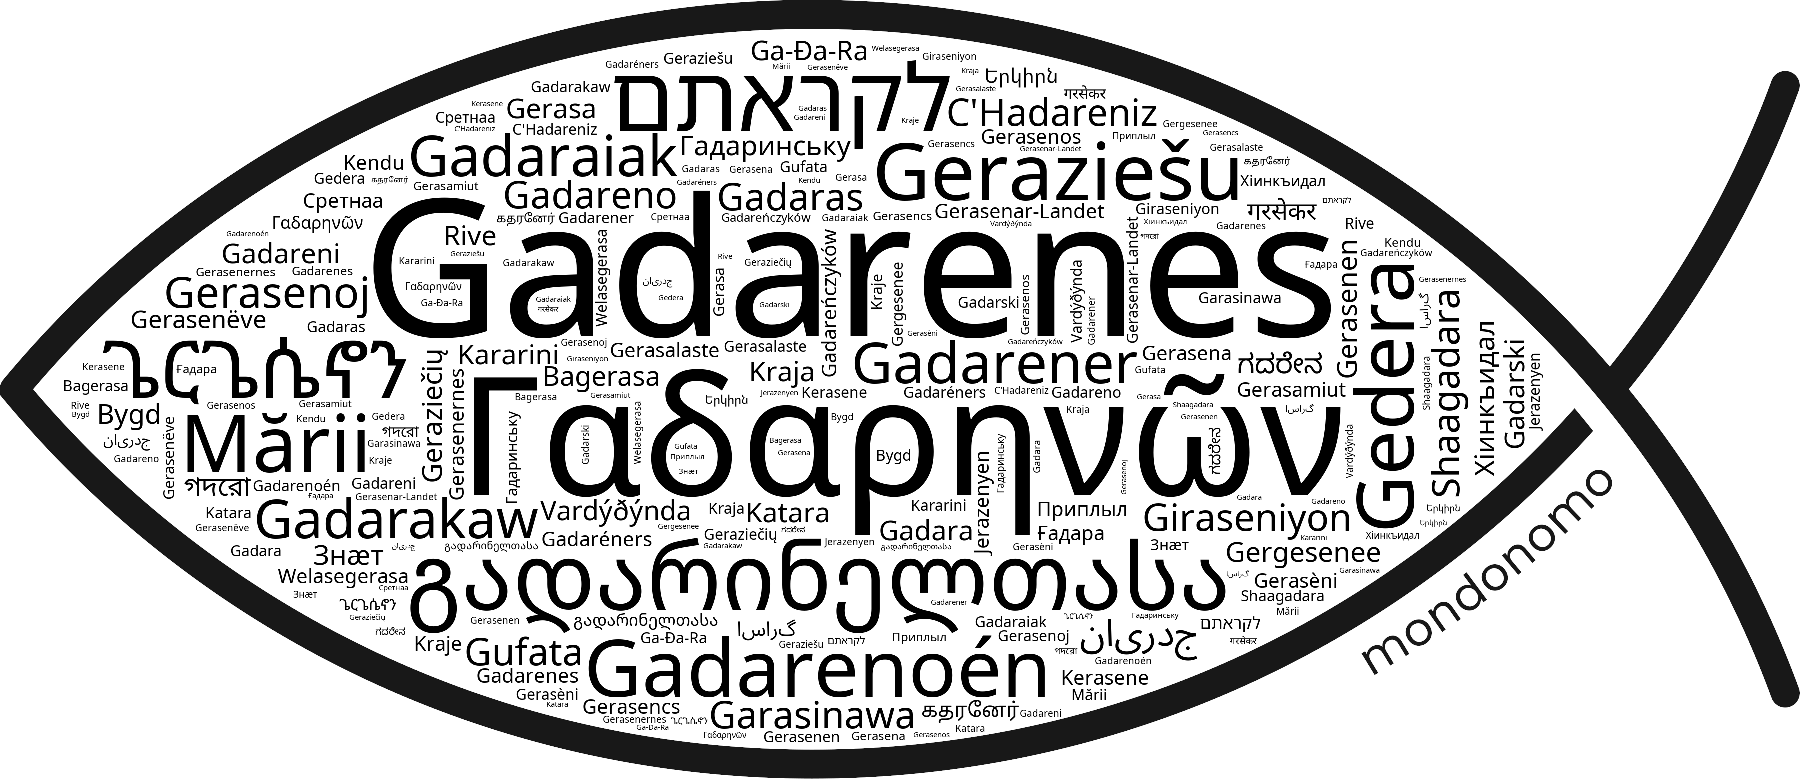 Name Gadarenes in the world's Bibles